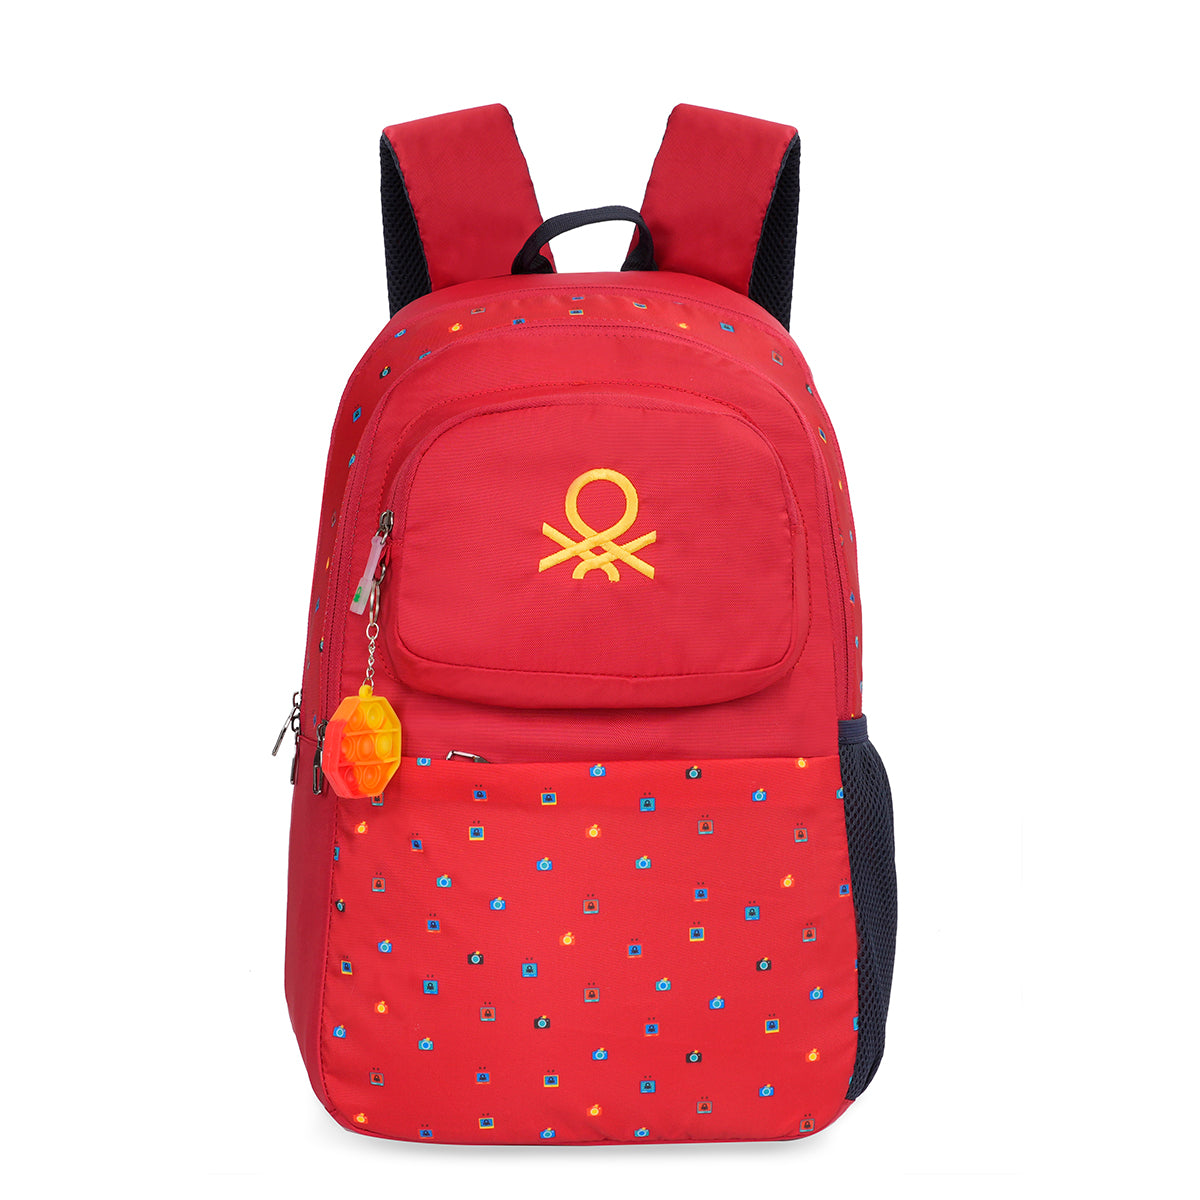 United Colors of Benetton Otis Back to School Backpack Red